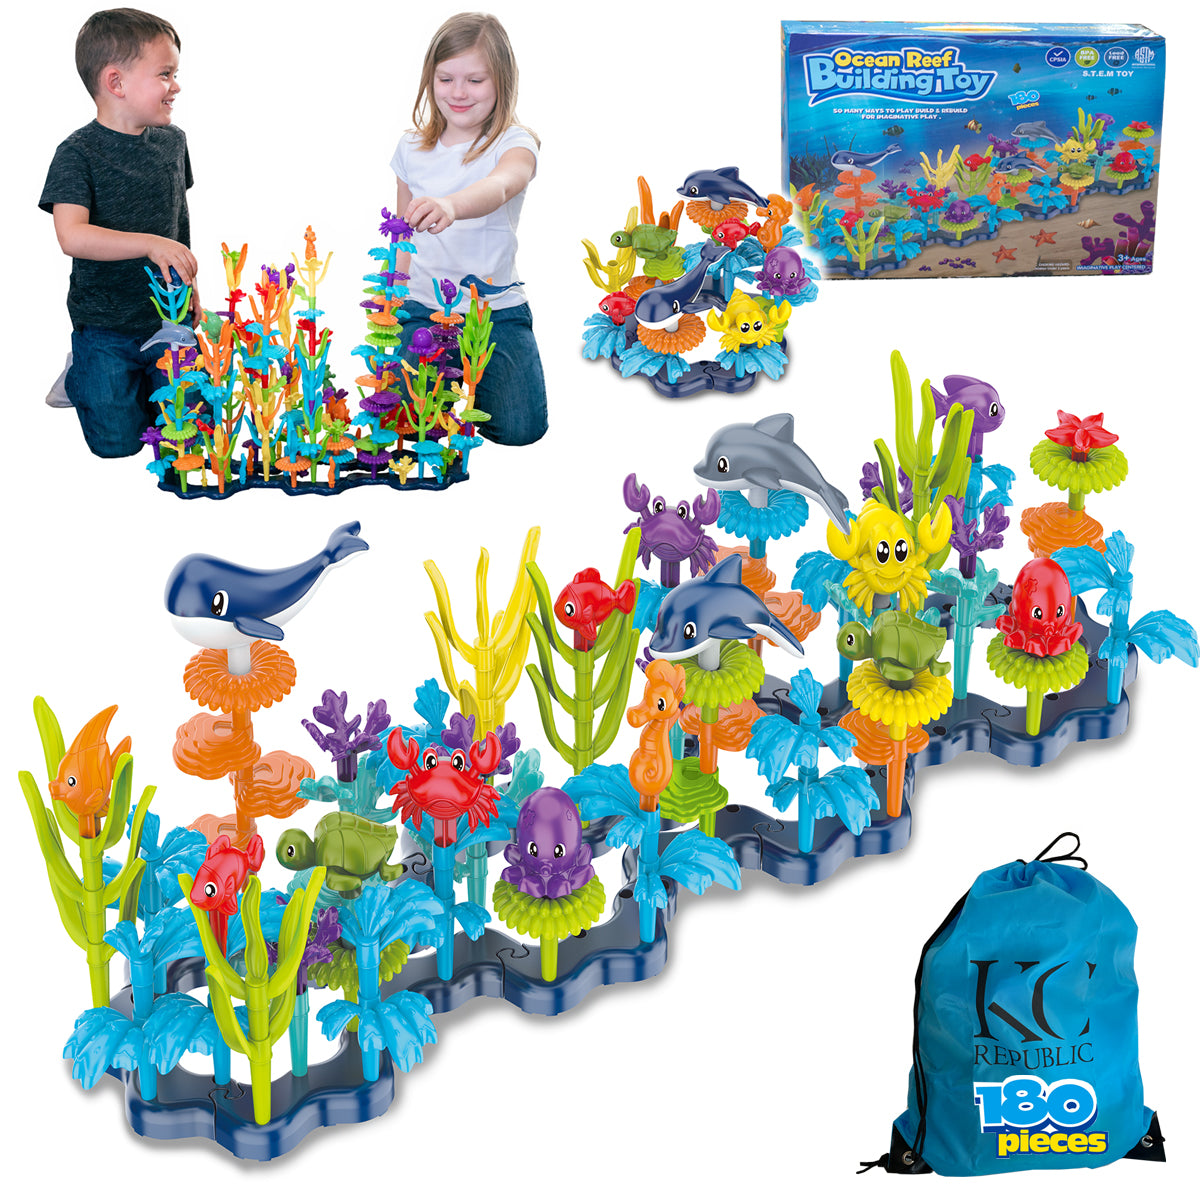 DIY Crochet Kit for Ocean Sea Animals With Coral Reef Building Toy Set 